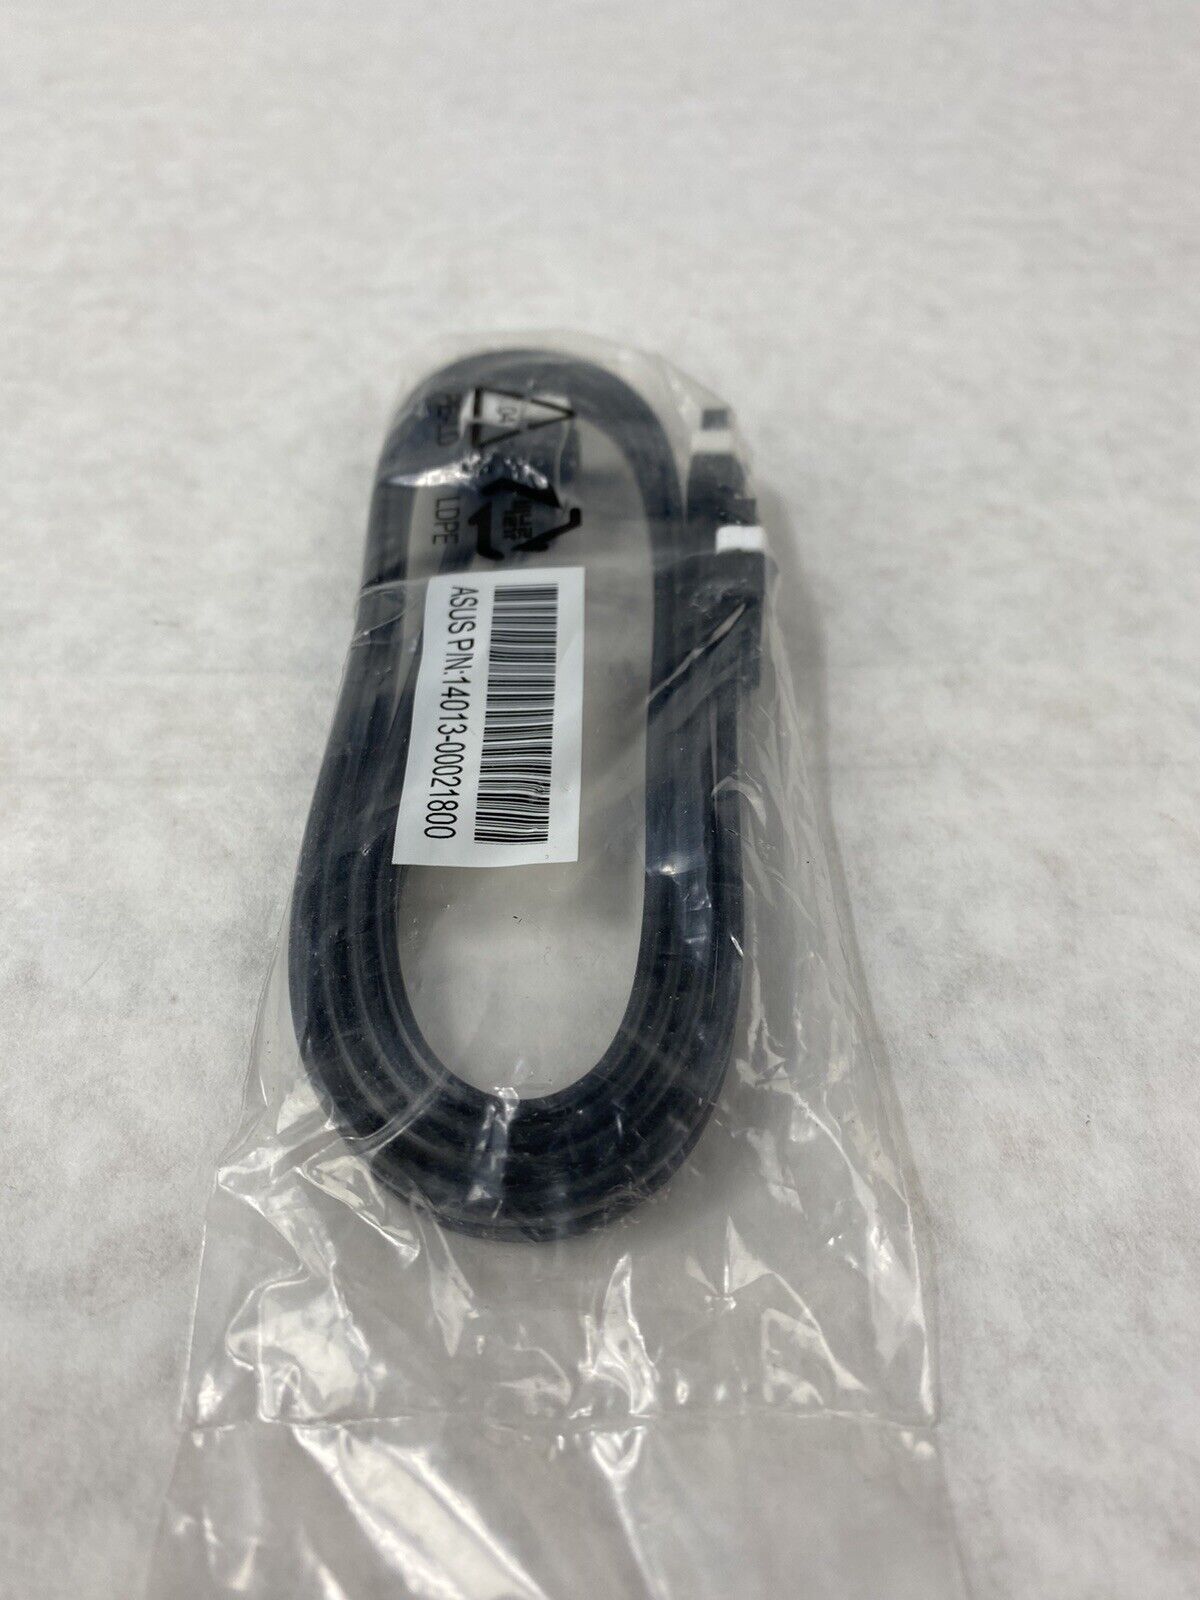 ASUS Data Cable 2 Pack 14013-00021800